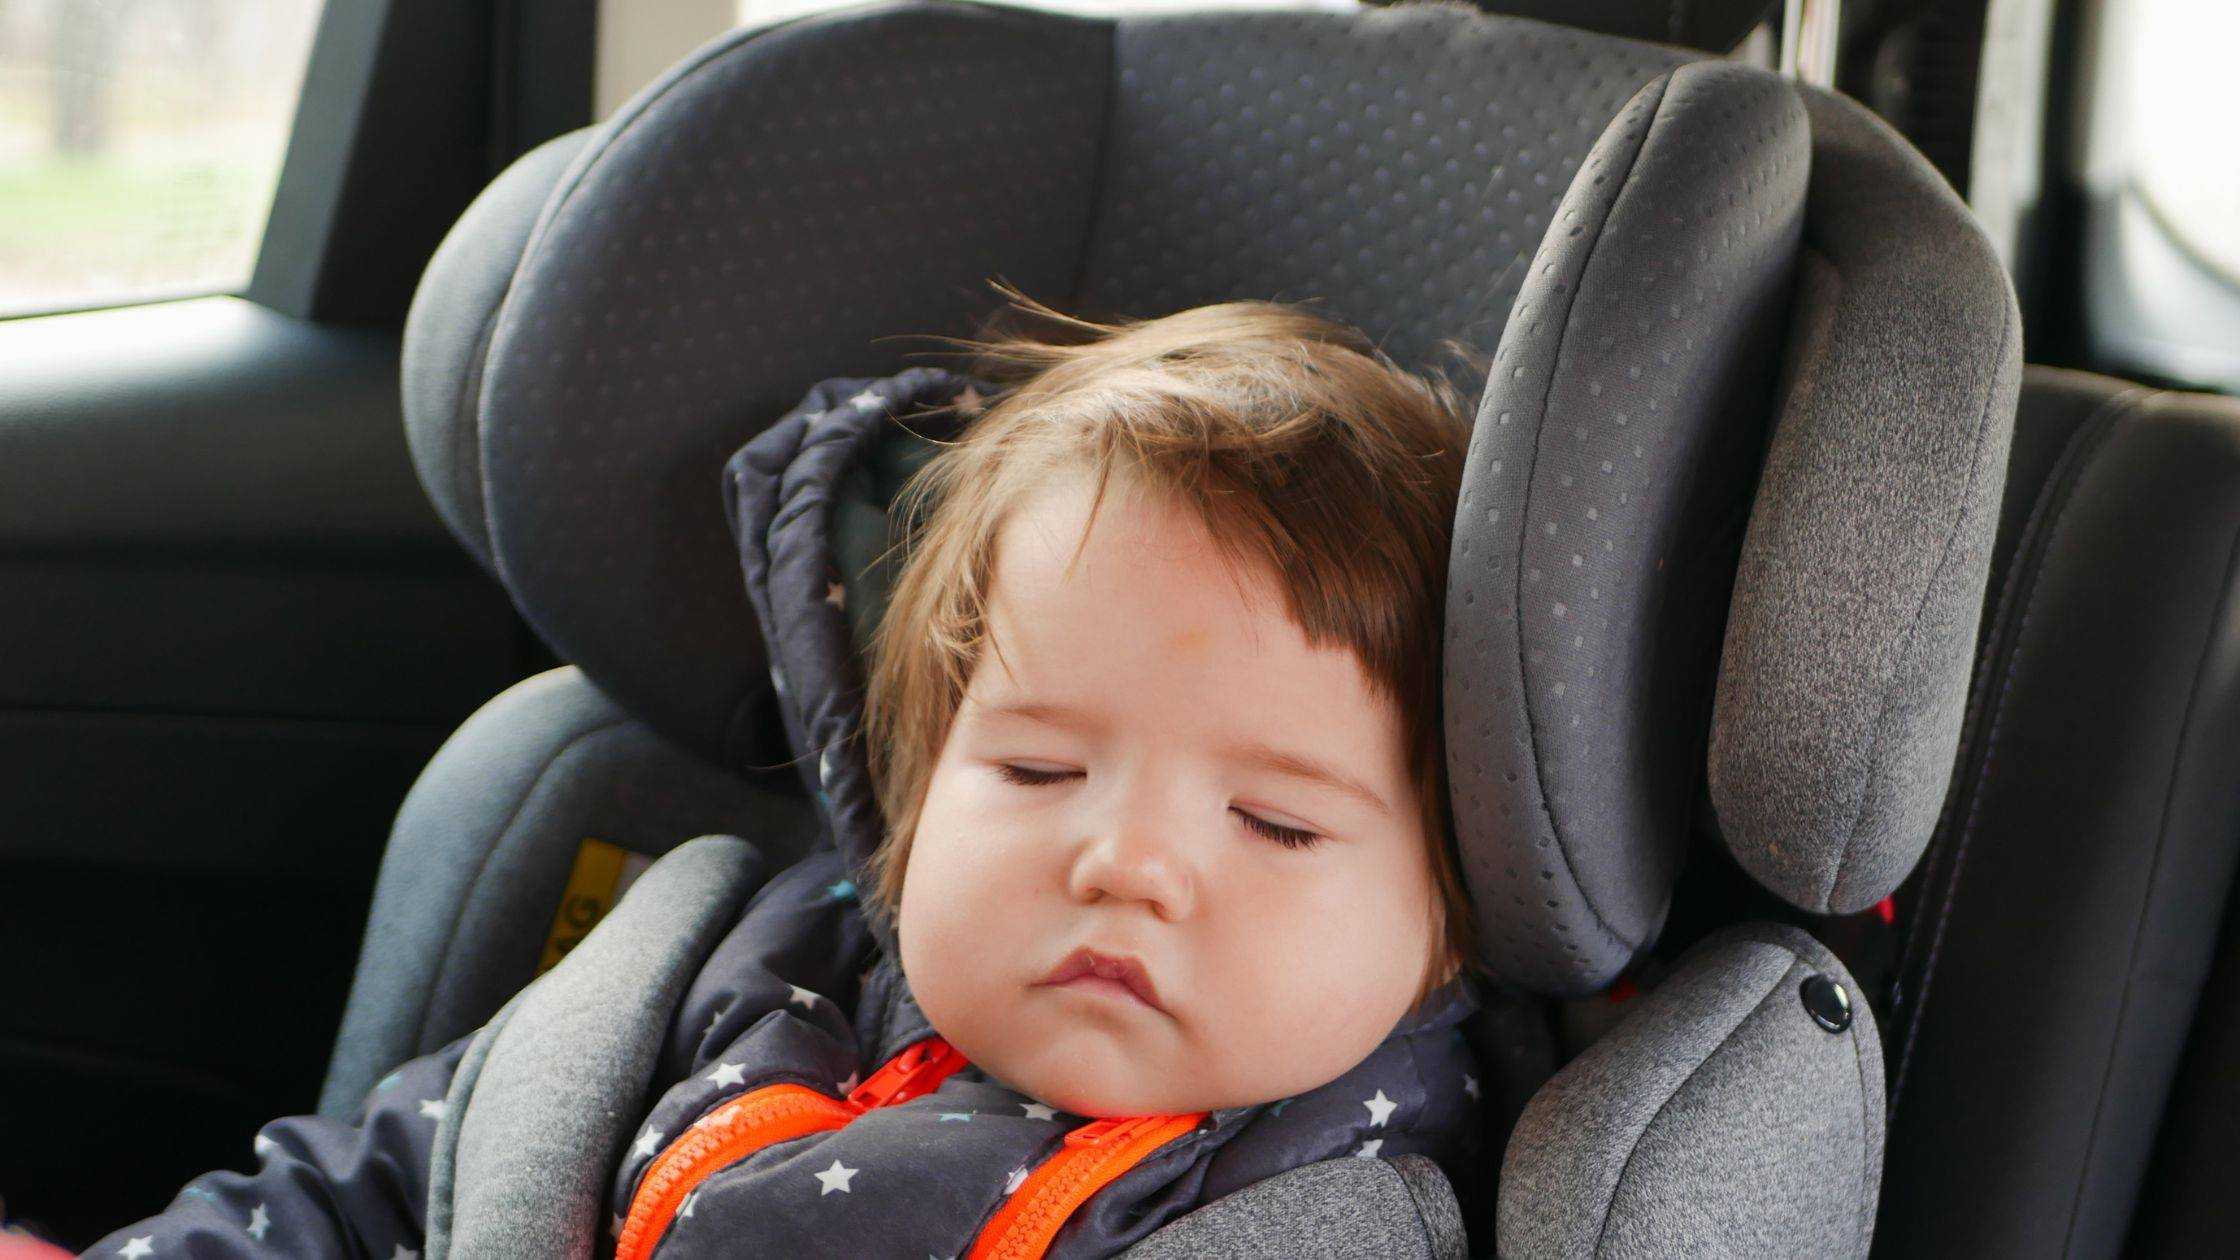 Some Vital Tips for Traveling by Car with My Baby: A Personal Guide